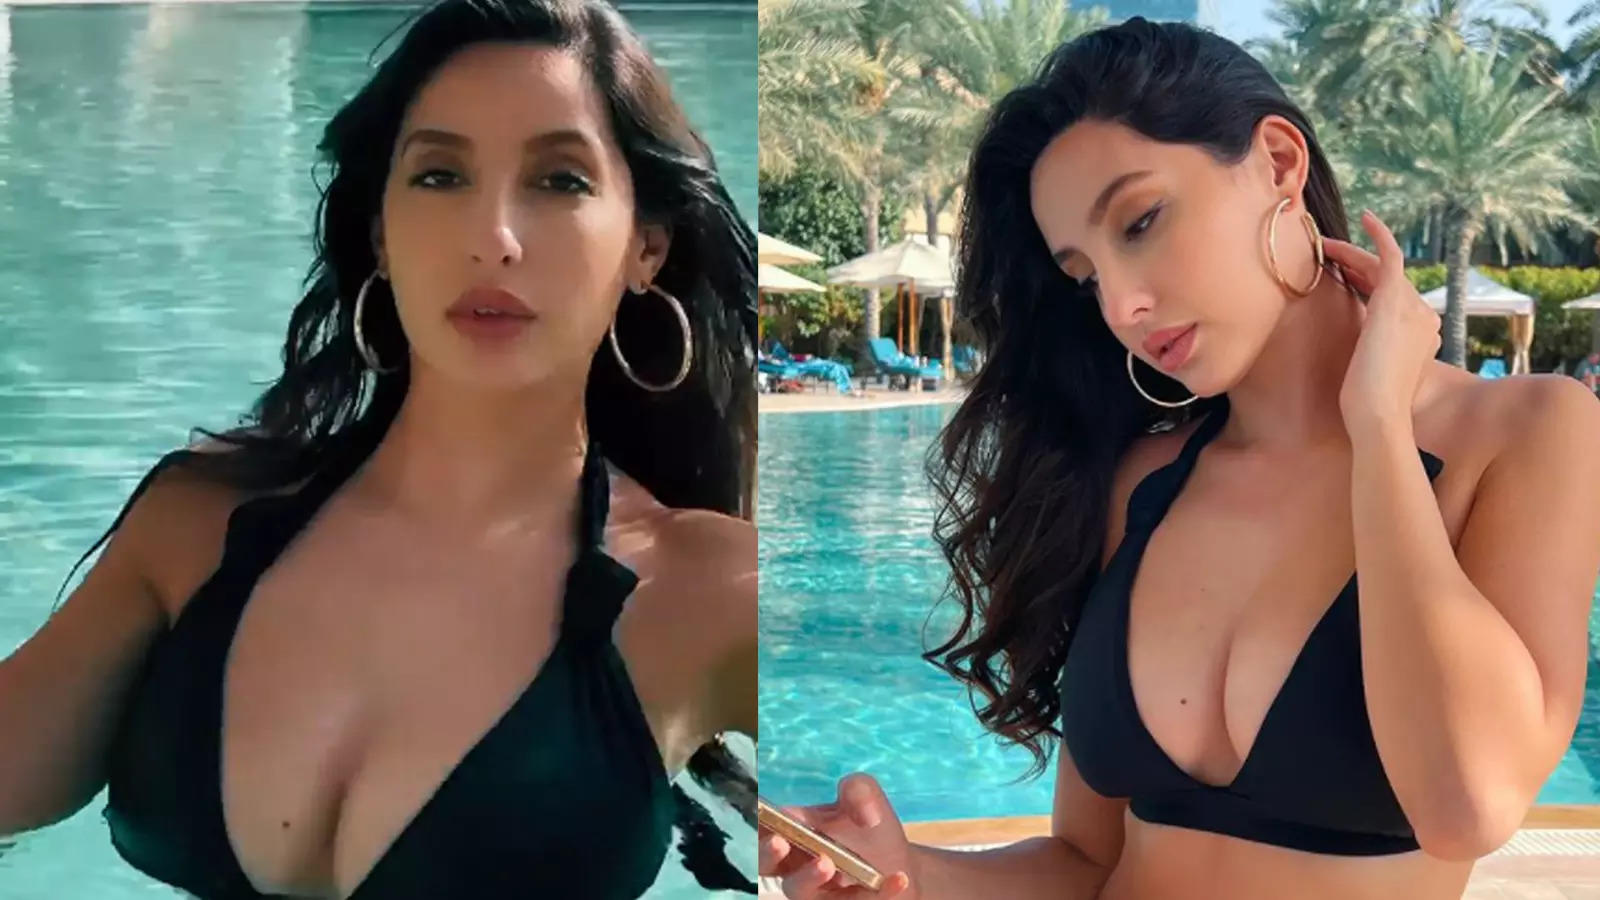 Shahrukh Khan Bf Xx - Nora Fatehi takes a dip in pool in black swimsuit, shows off her curves |  Hindi Movie News - Bollywood - Times of India